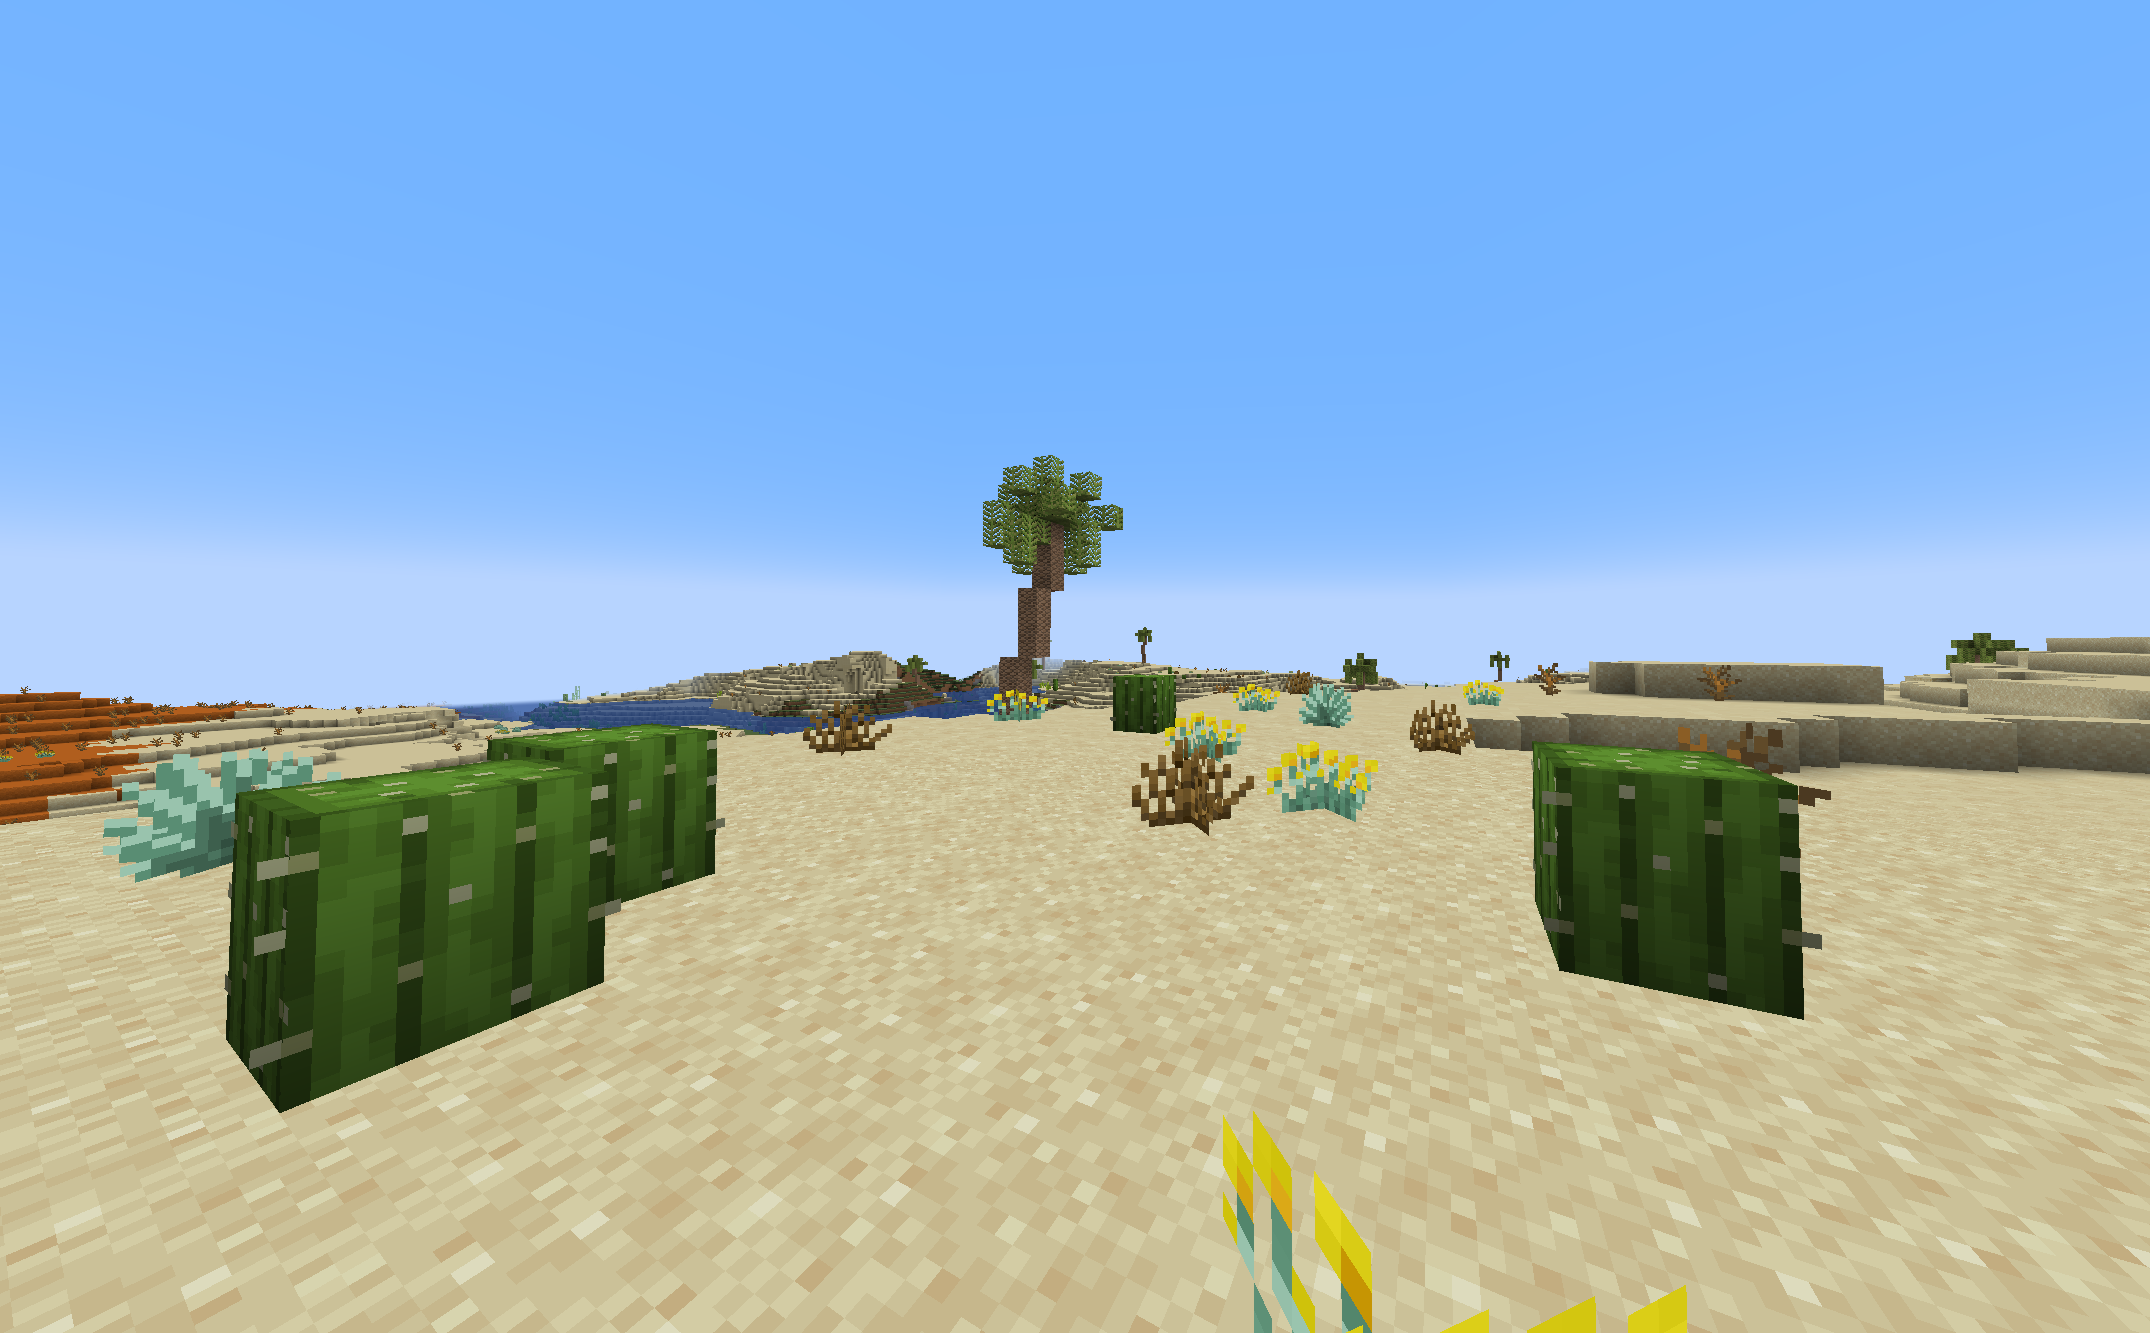 Desert biome with newly added flowers, shrubs, and palm trees.